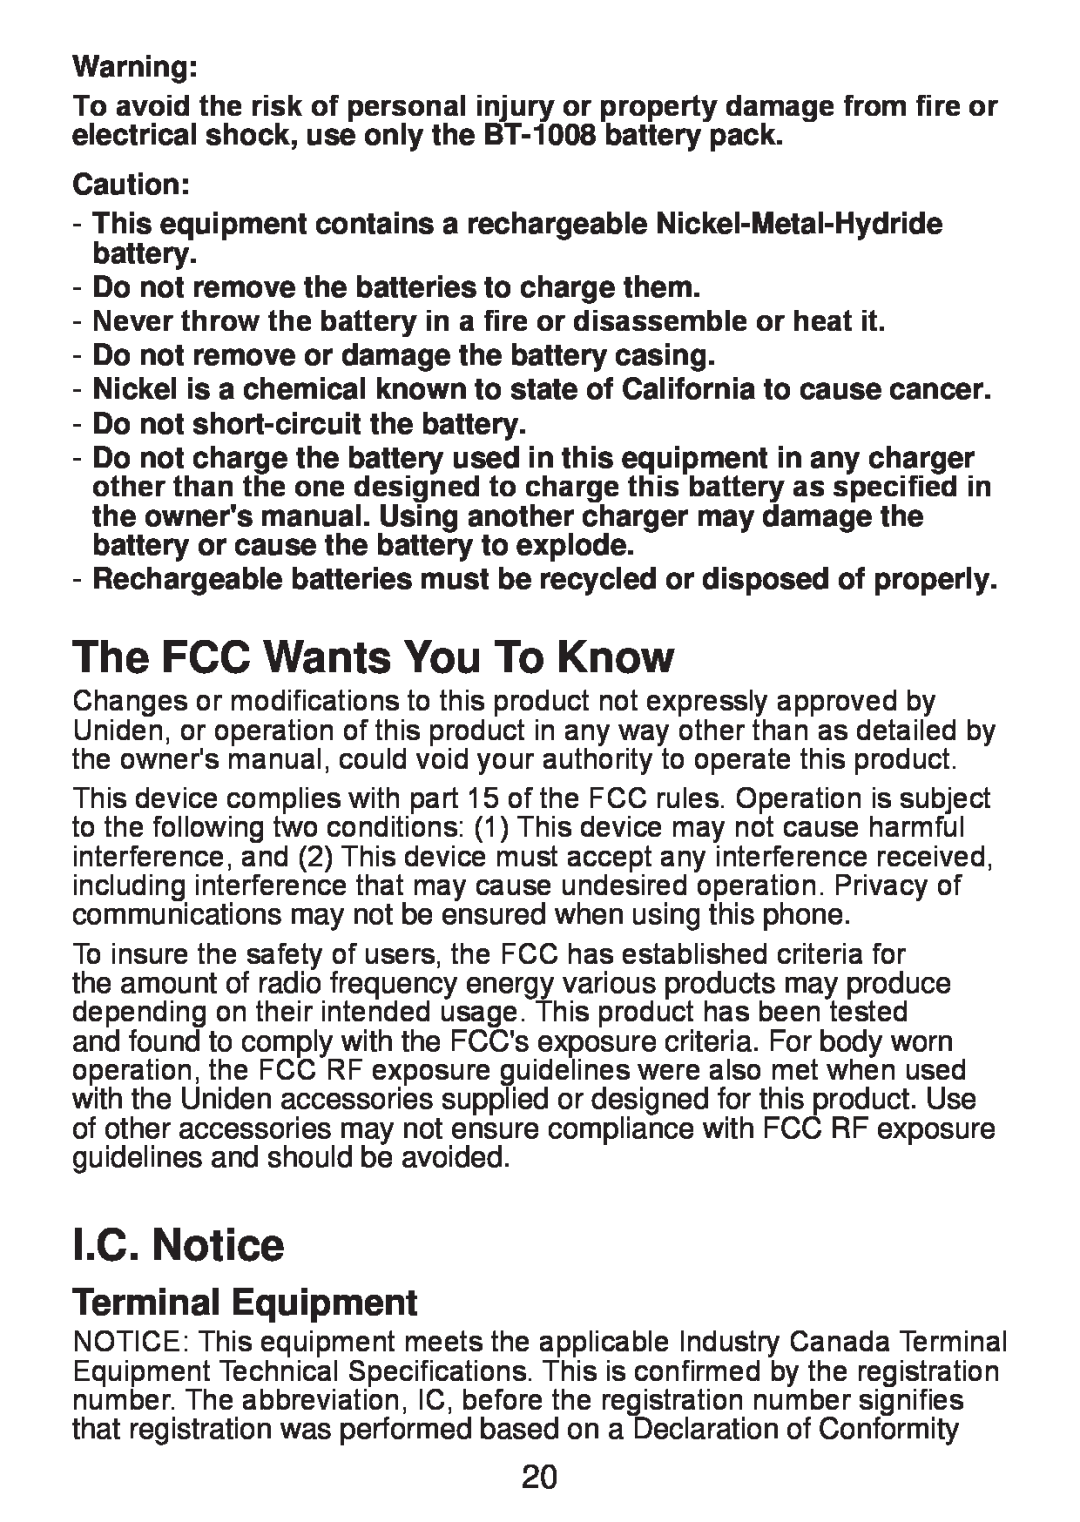 Uniden DWX207 manual The FCC Wants You To Know, I.C. Notice, Terminal Equipment 